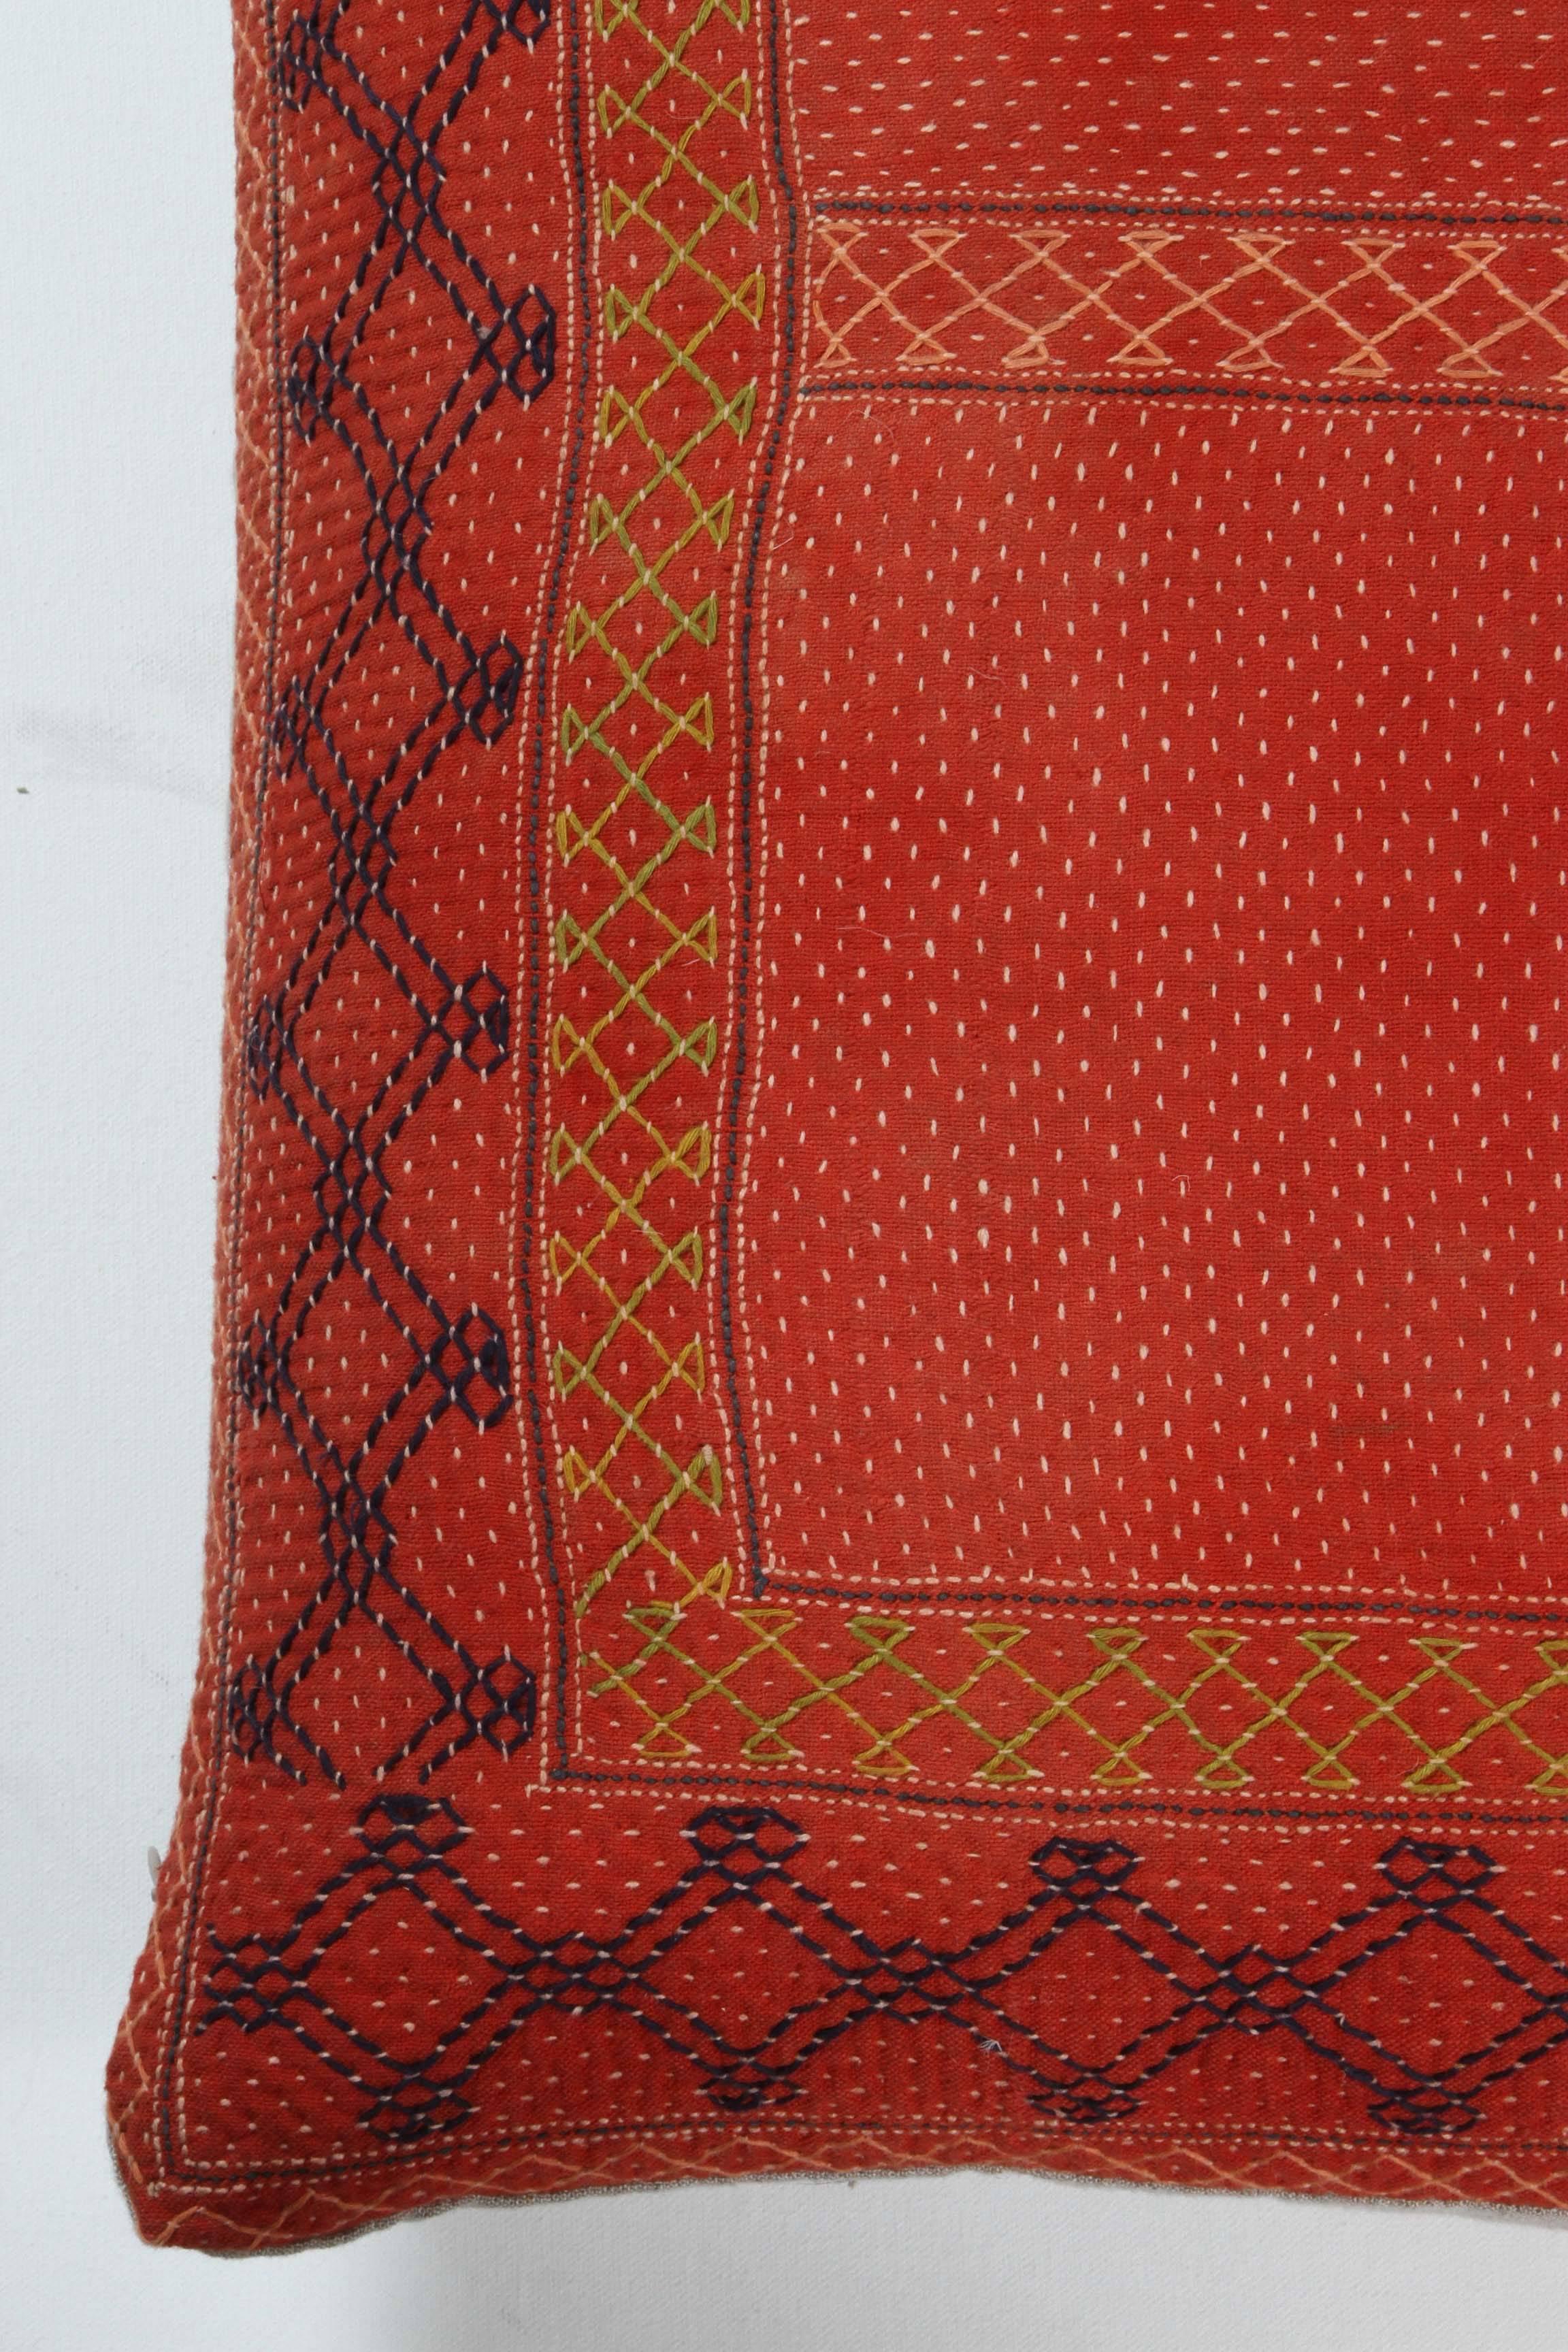 Indian Banjara Cotton Bag Face Pillow, Orange-Red, Yellow and Blue In Good Condition For Sale In Los Angeles, CA